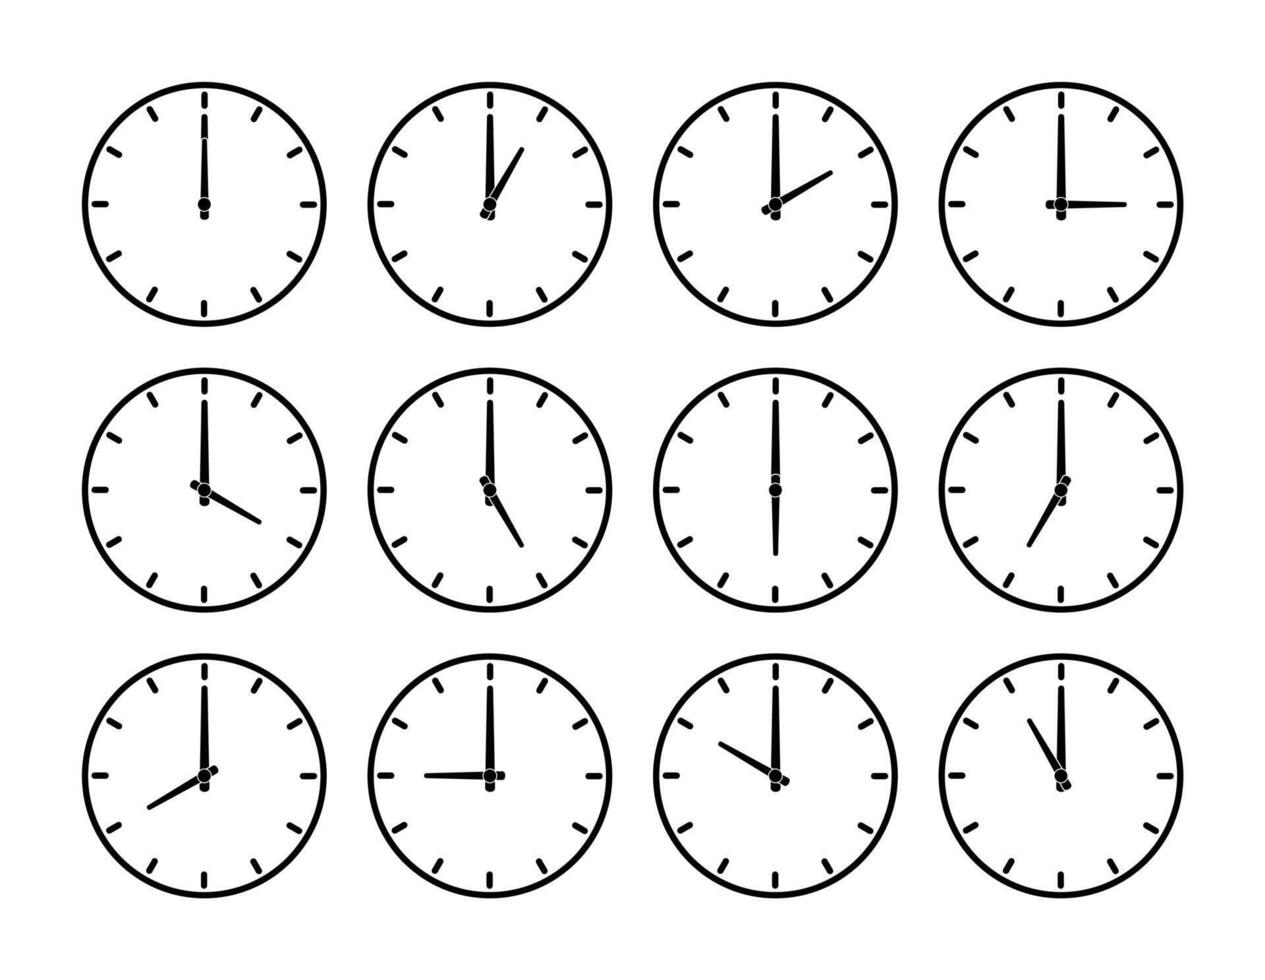 Set of round clocks showing various time. Simple and minimalist vector illustration. The clock shows different time in a day.